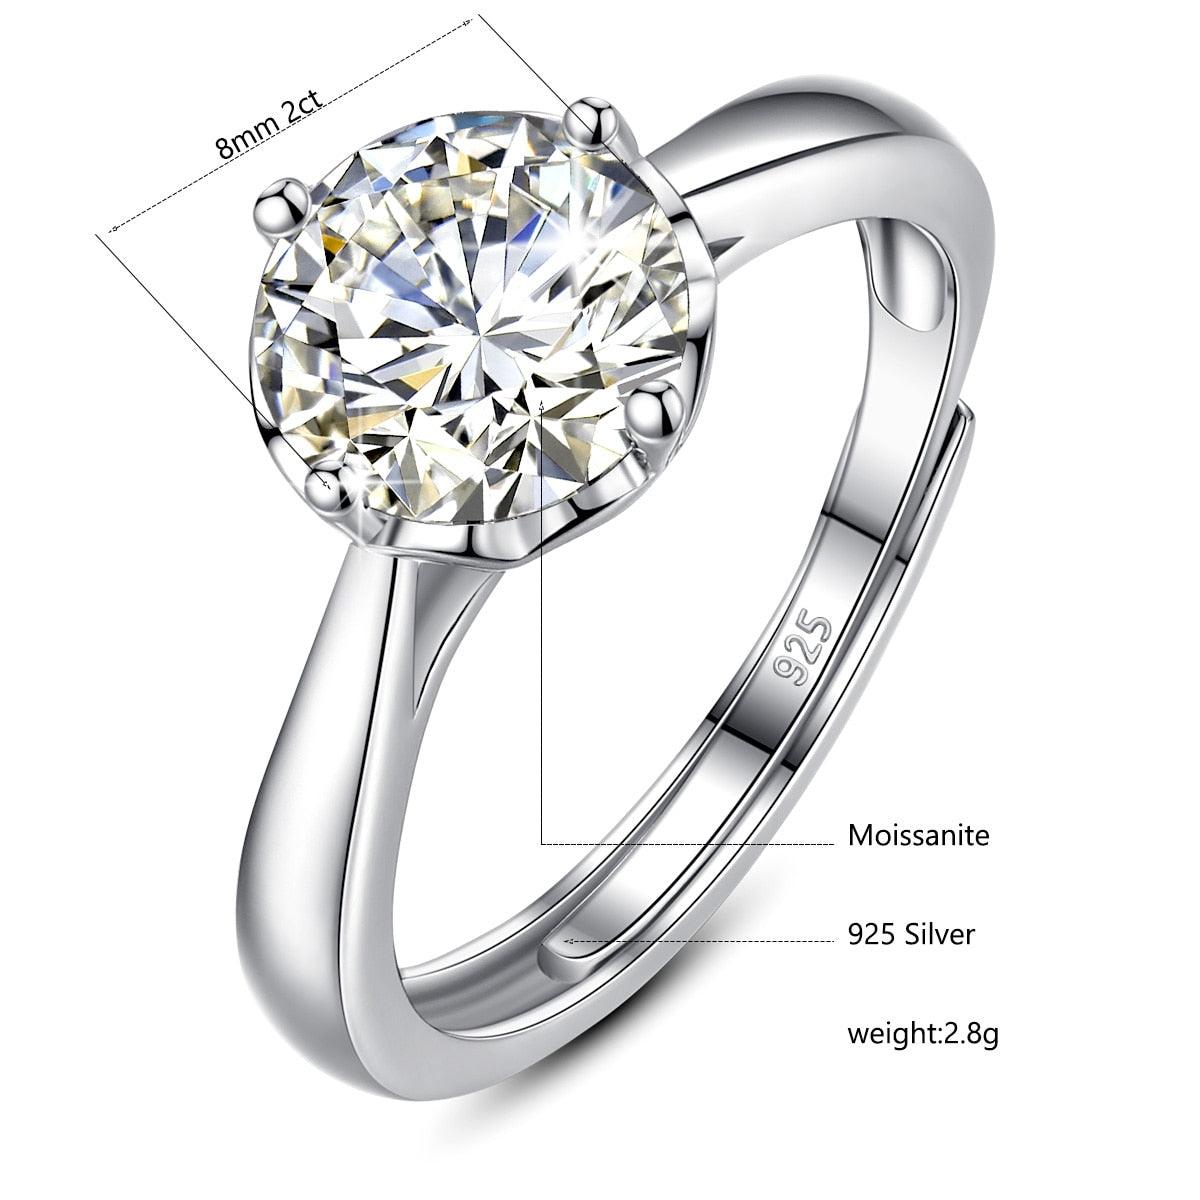 Terrific Round Cut 1ct and 2ct D Color VVS1 High Quality Moissanite Diamonds  - Trendy Luxury Jewellery - The Jewellery Supermarket